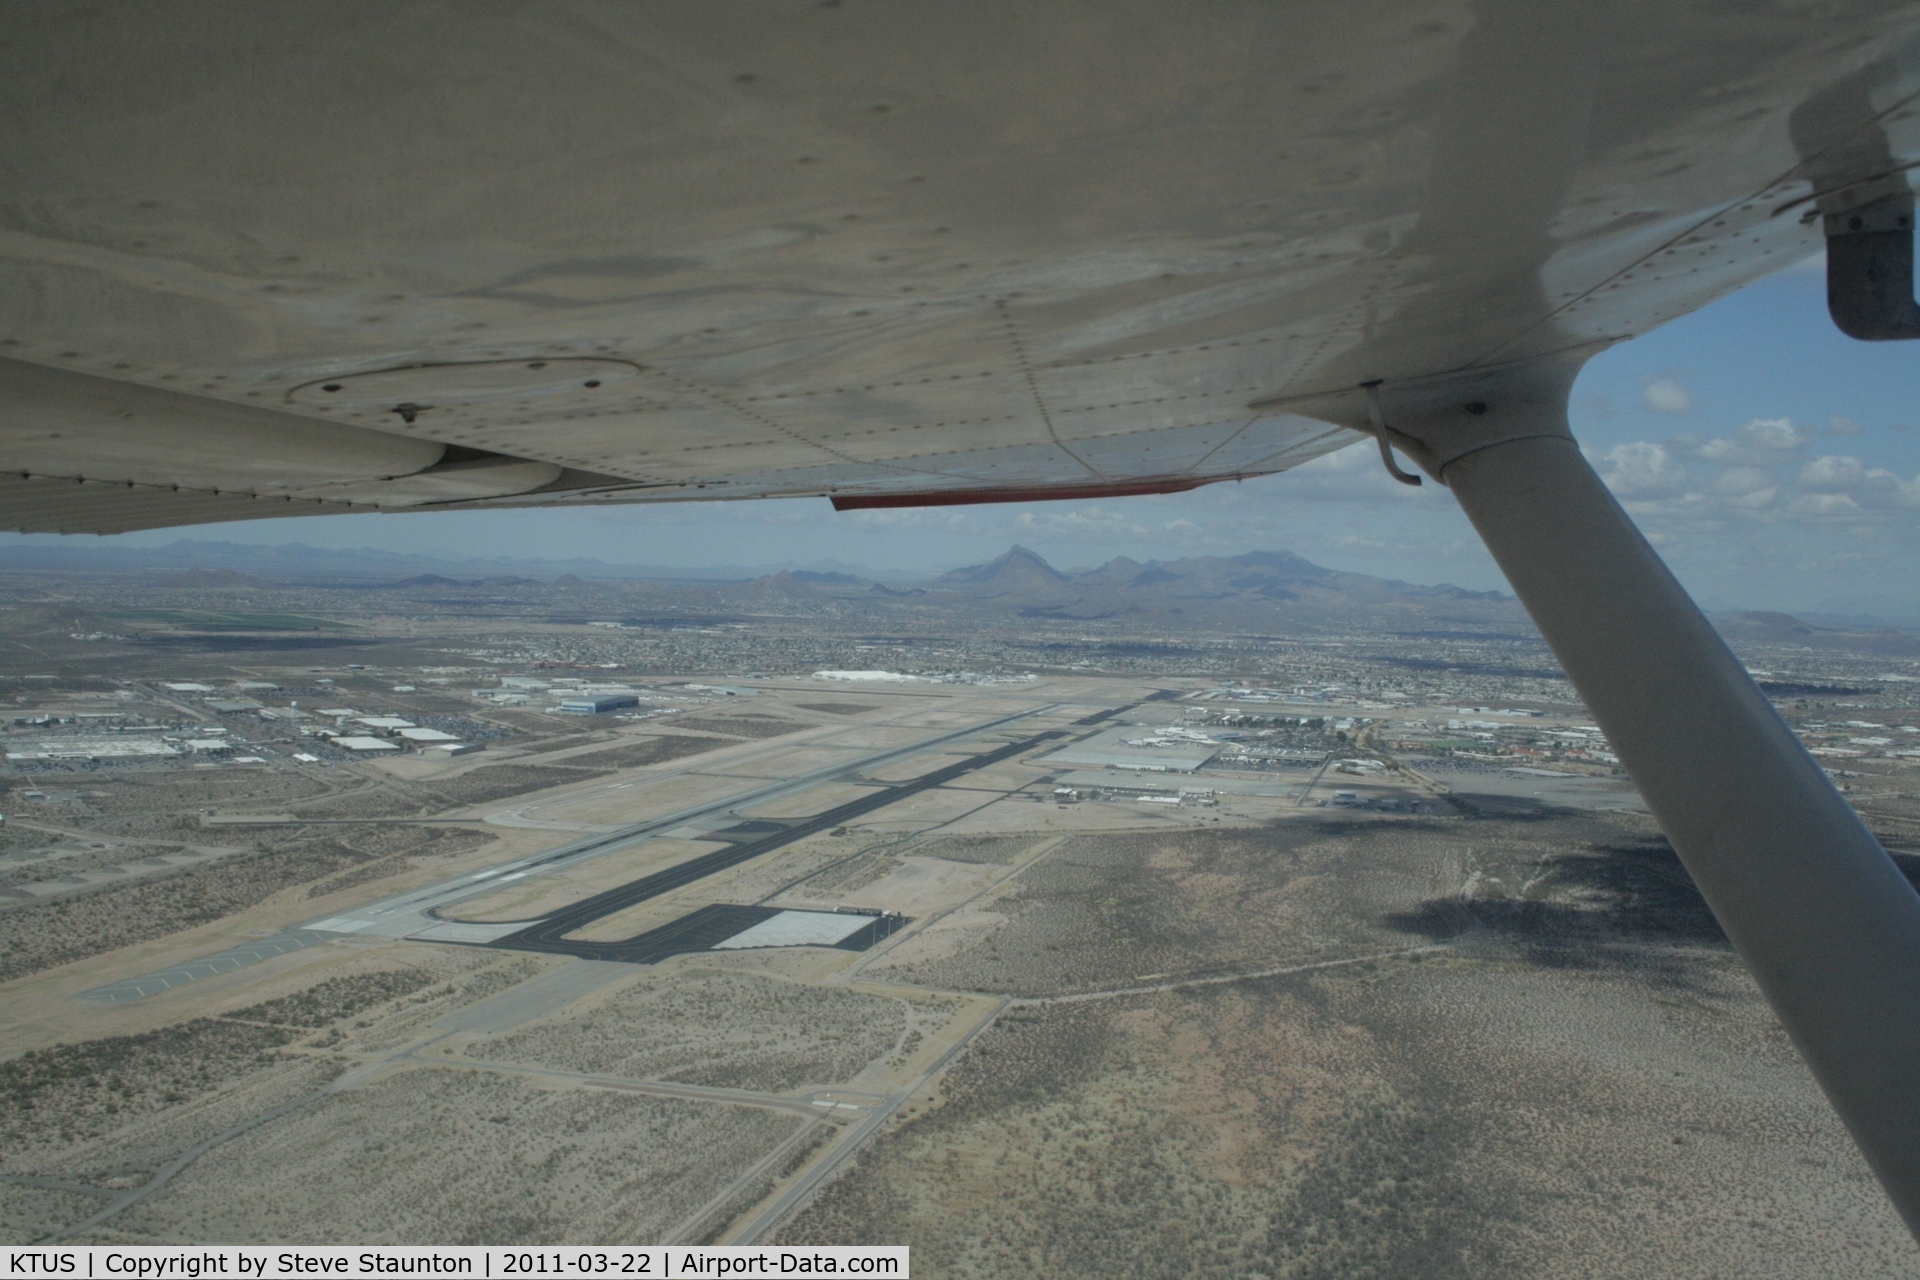 Tucson International Airport (TUS) - Taken at Tucson International Airport, in March 2011 whilst on an Aeroprint Aviation tour. This picture was taken from Cessna 172 N5802J.